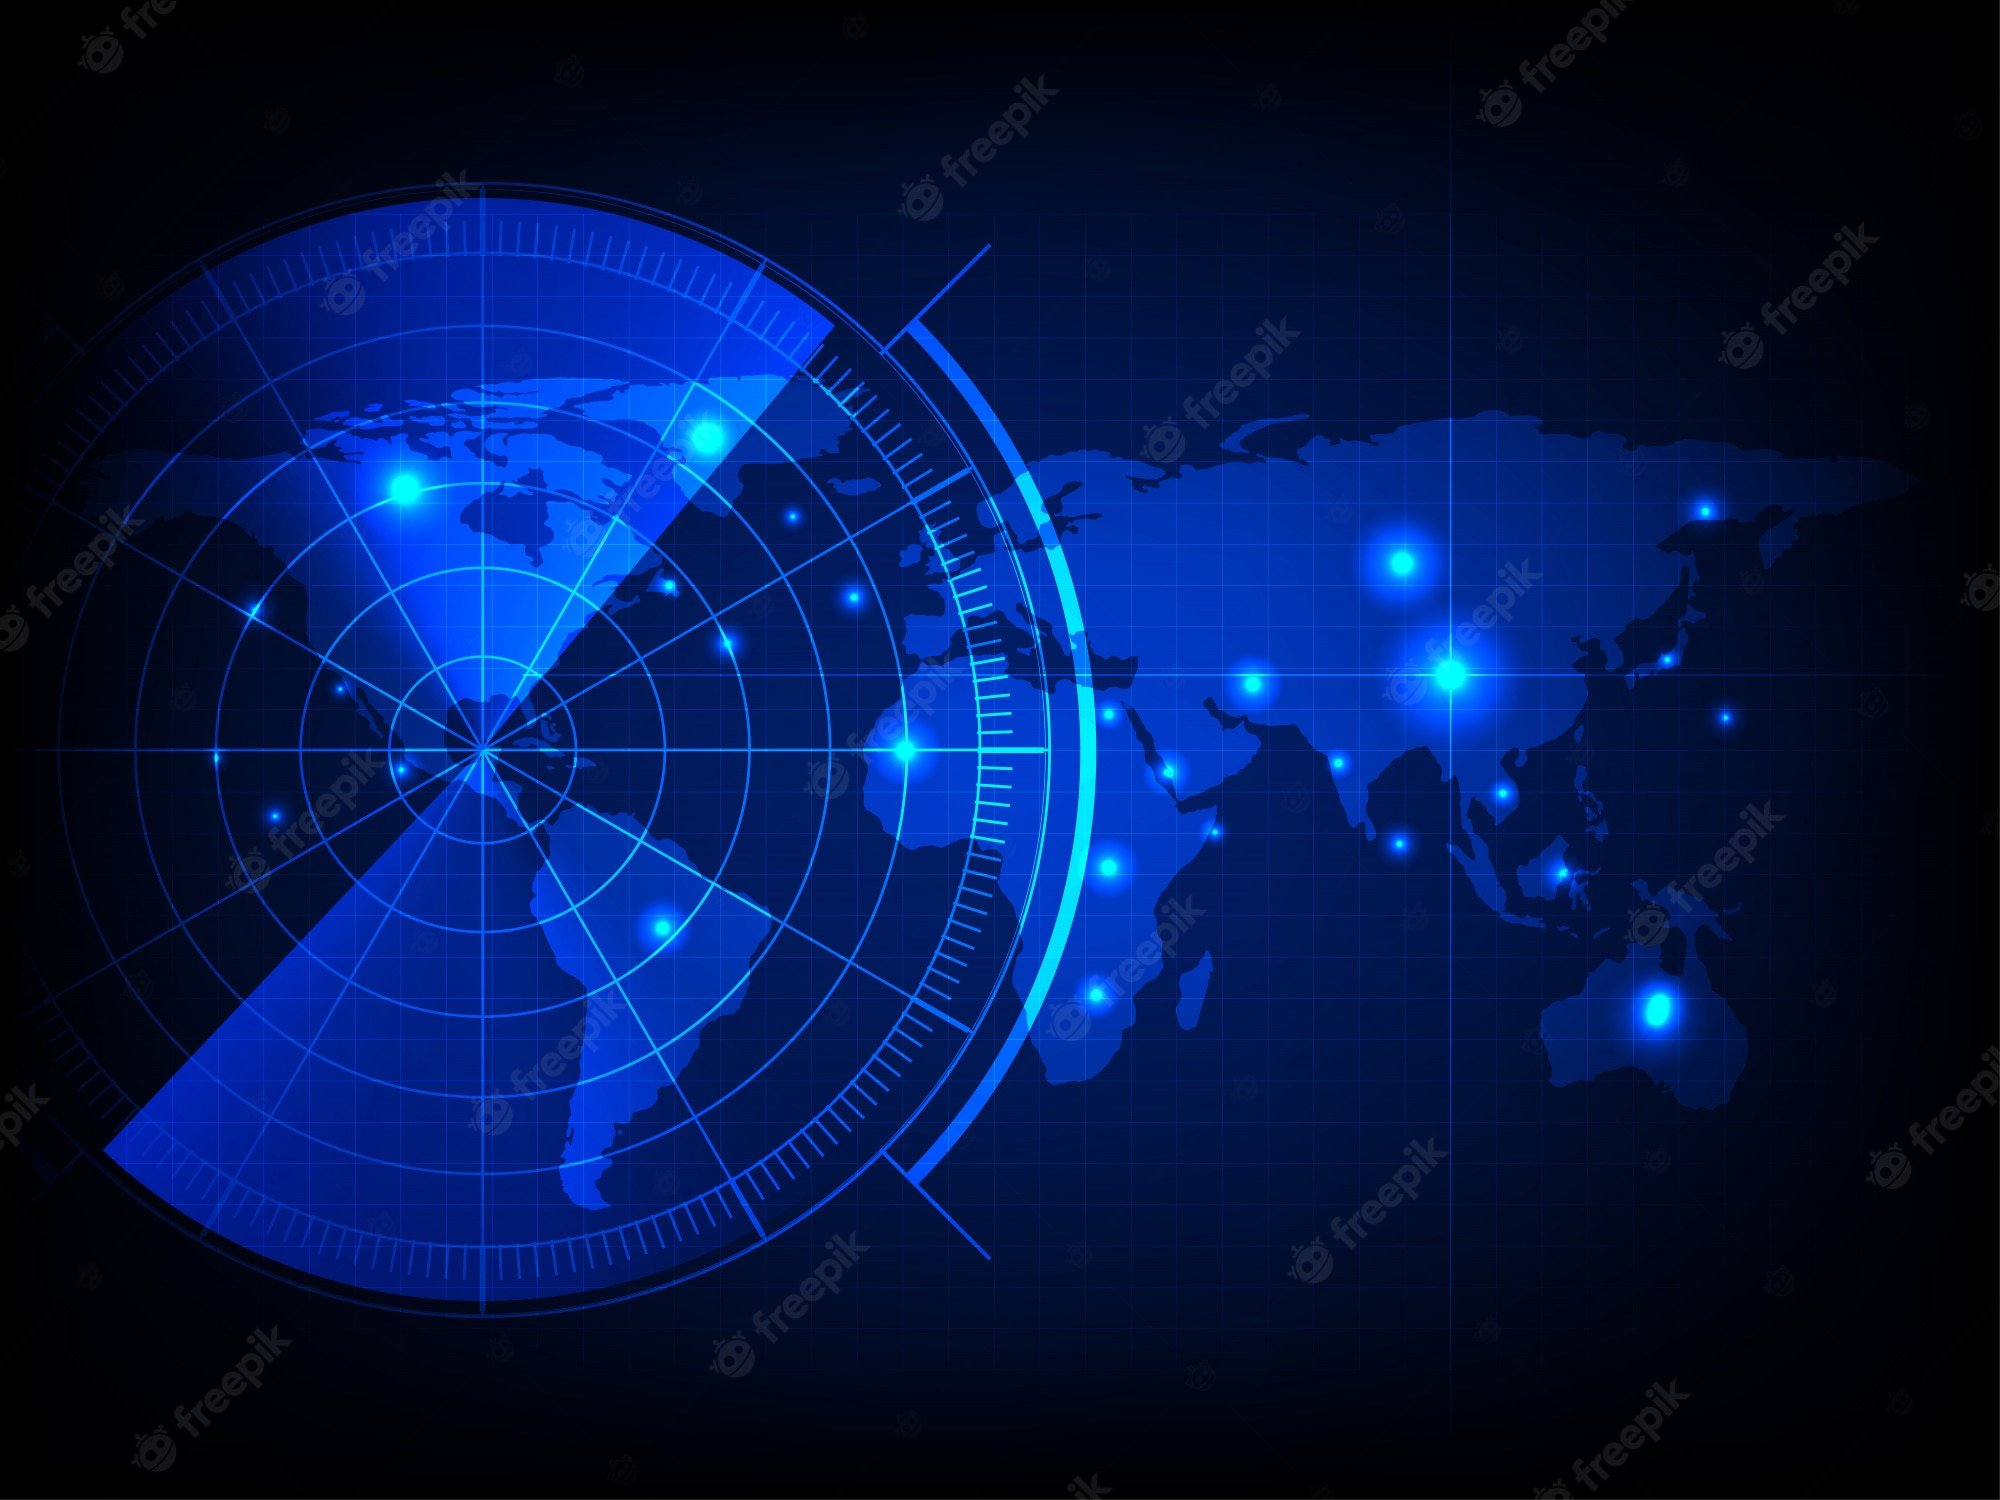 Premium Vector. World map with a radar screen, digital blue radar with targets and world map using as background and wallpaper